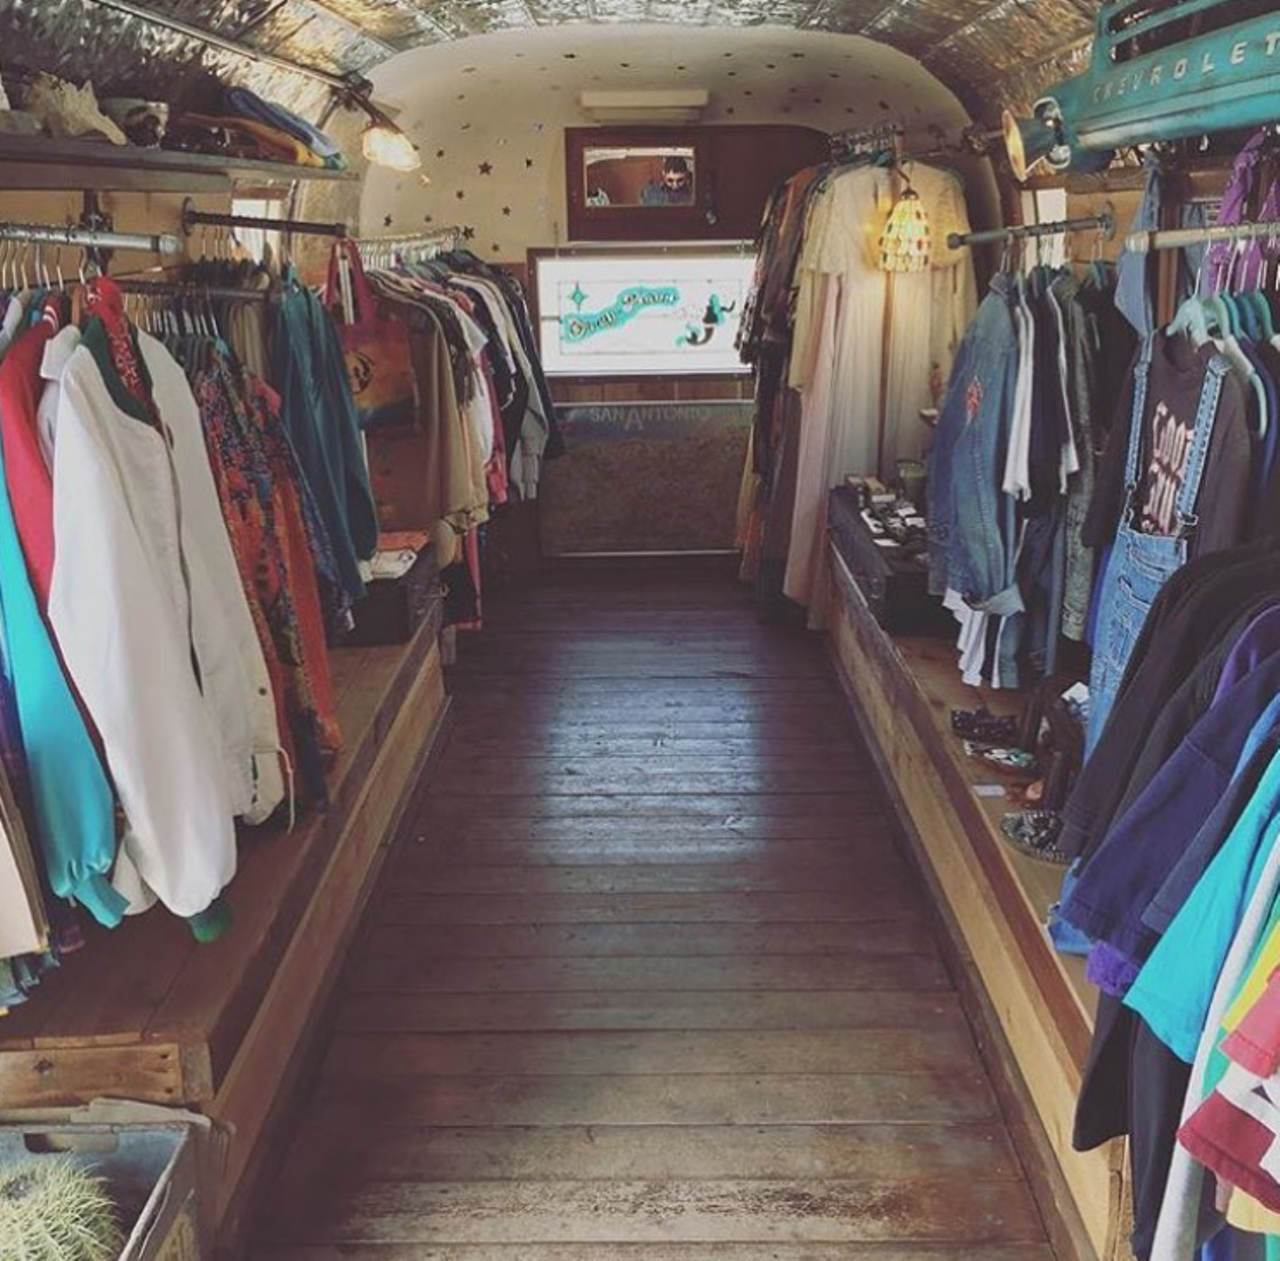 Grey Moon Vintage
2202 Broadway St, greymoonvintage.com
Sure it’s small, but this vintage shop operates out of a 1969 trailer. How cool is that?! You’ll find a curated selection here, so this is just the place when you want to find something fashionable without roaming aisle after aisle of bargains.
Photo via Instagram / greymoonvintage